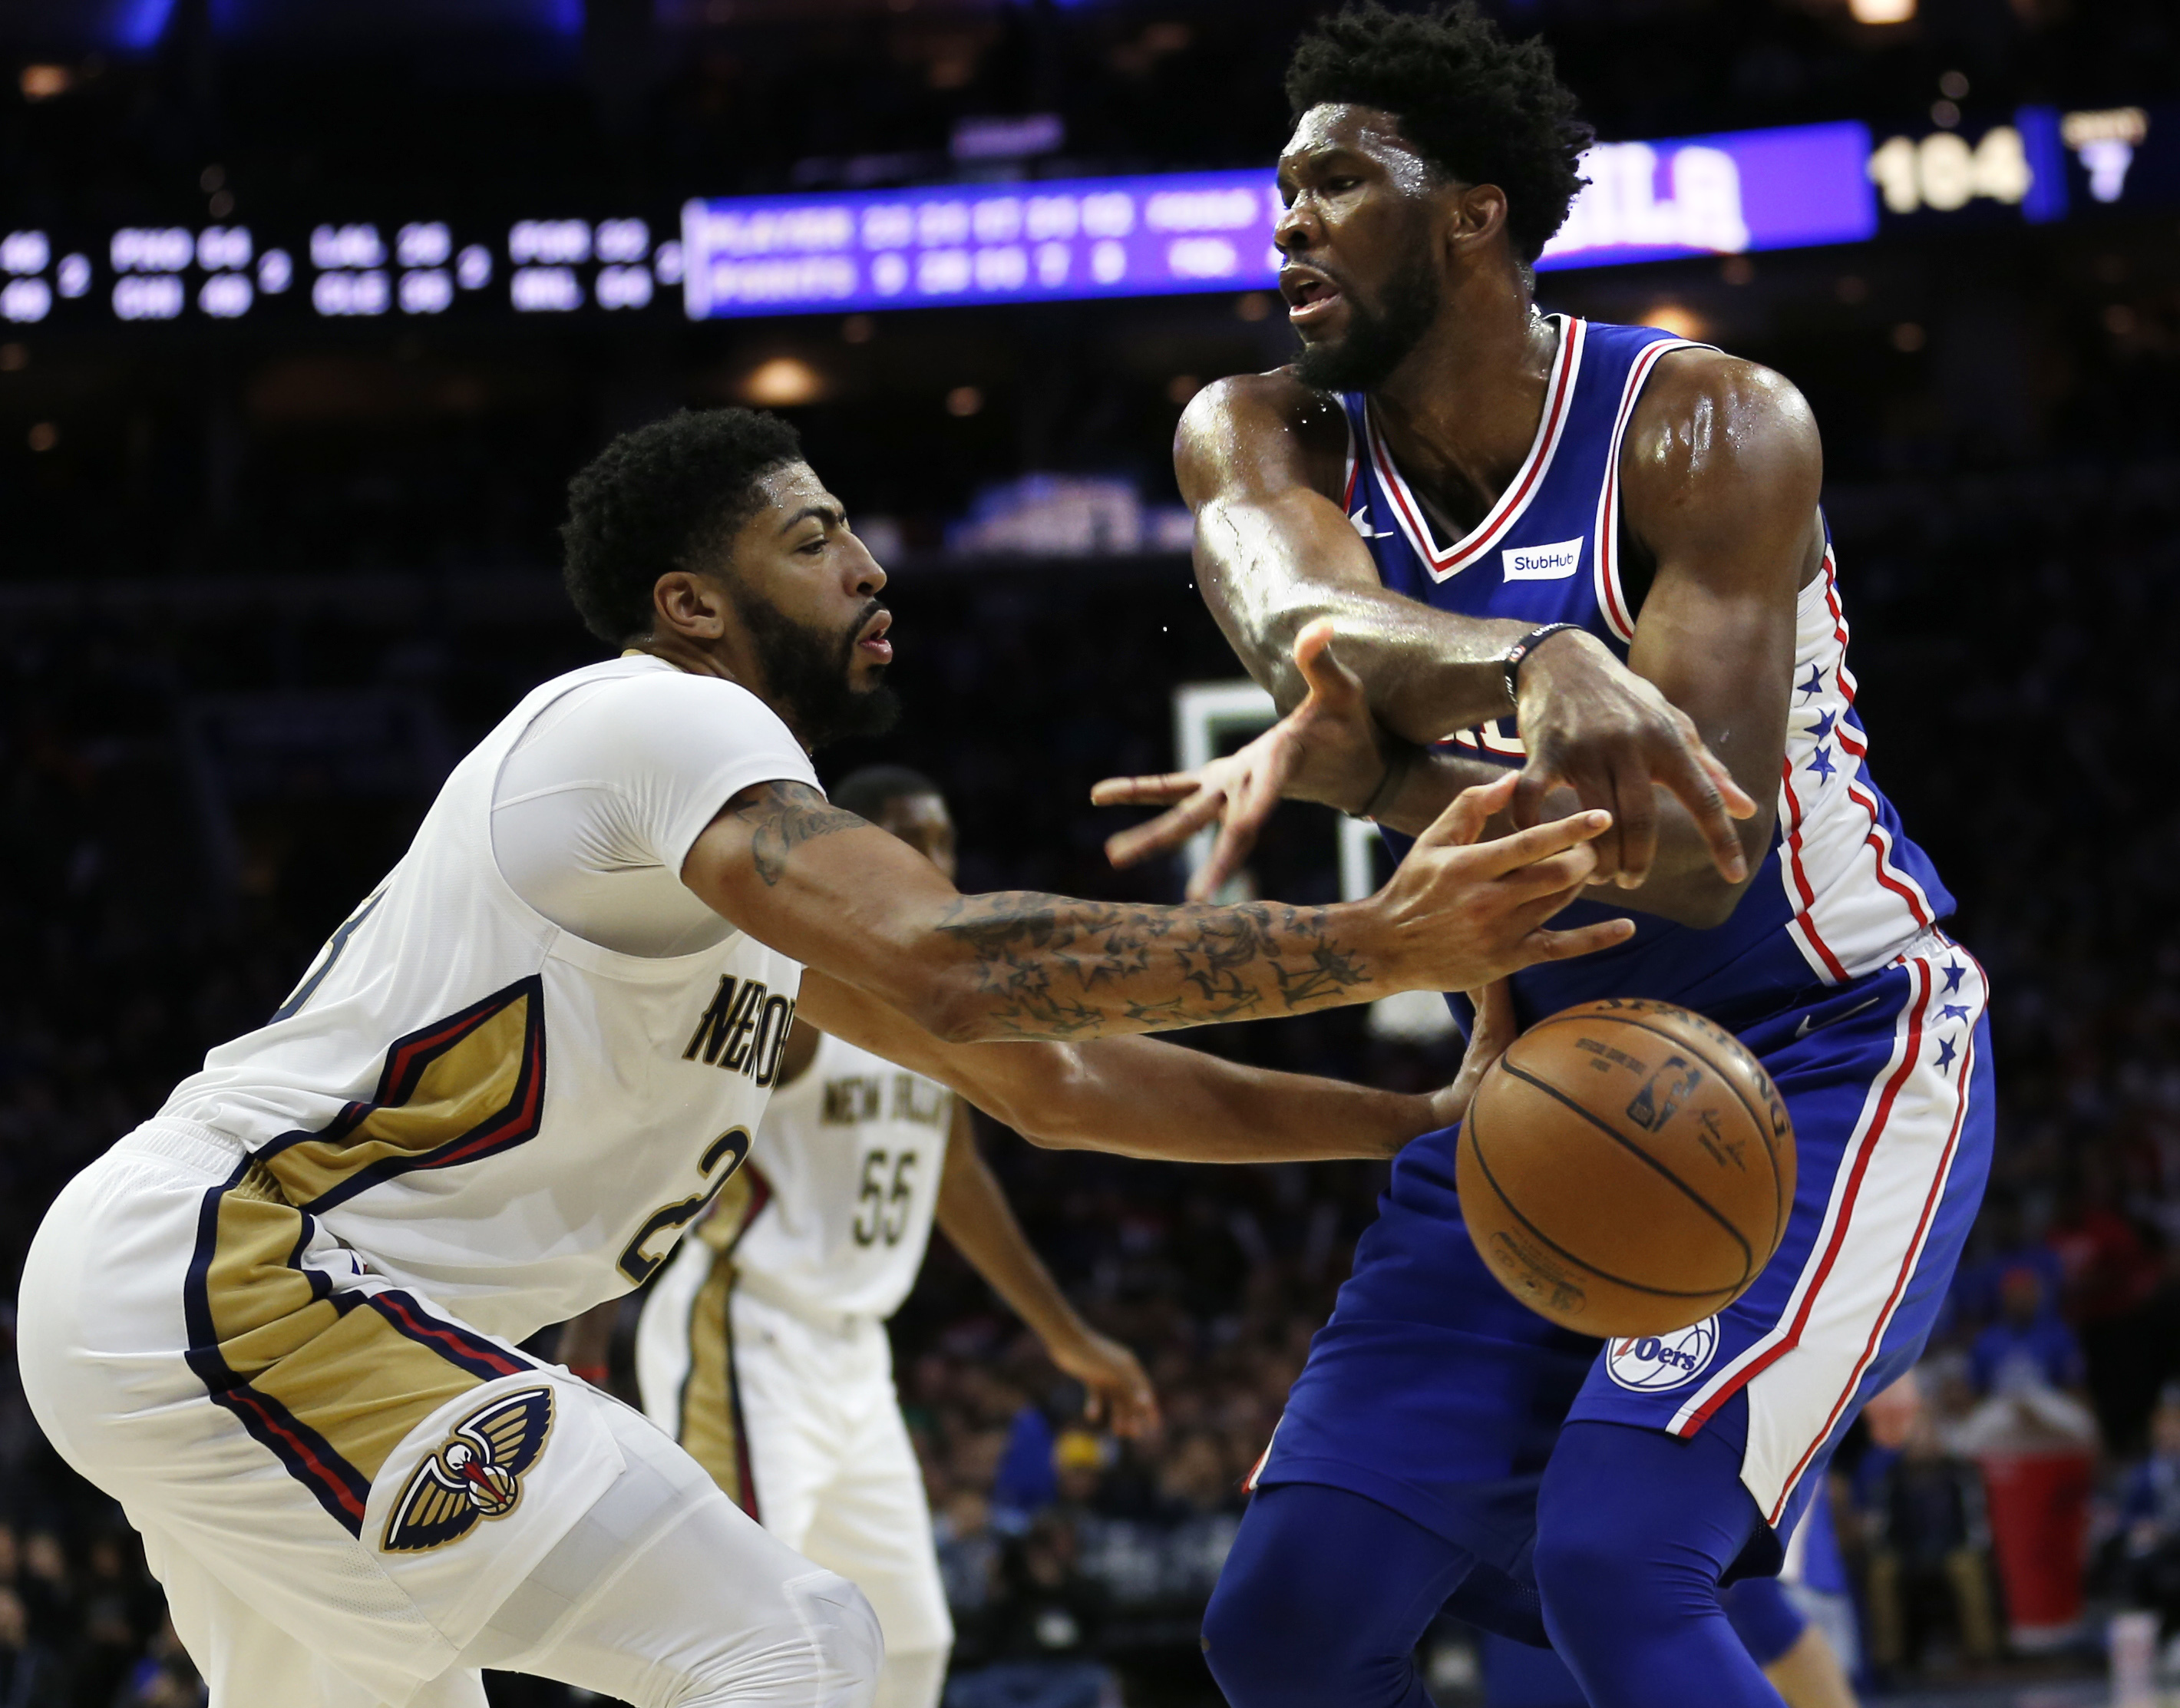 Embiid, 76ers top Pelicans after Davis’ missed free throw